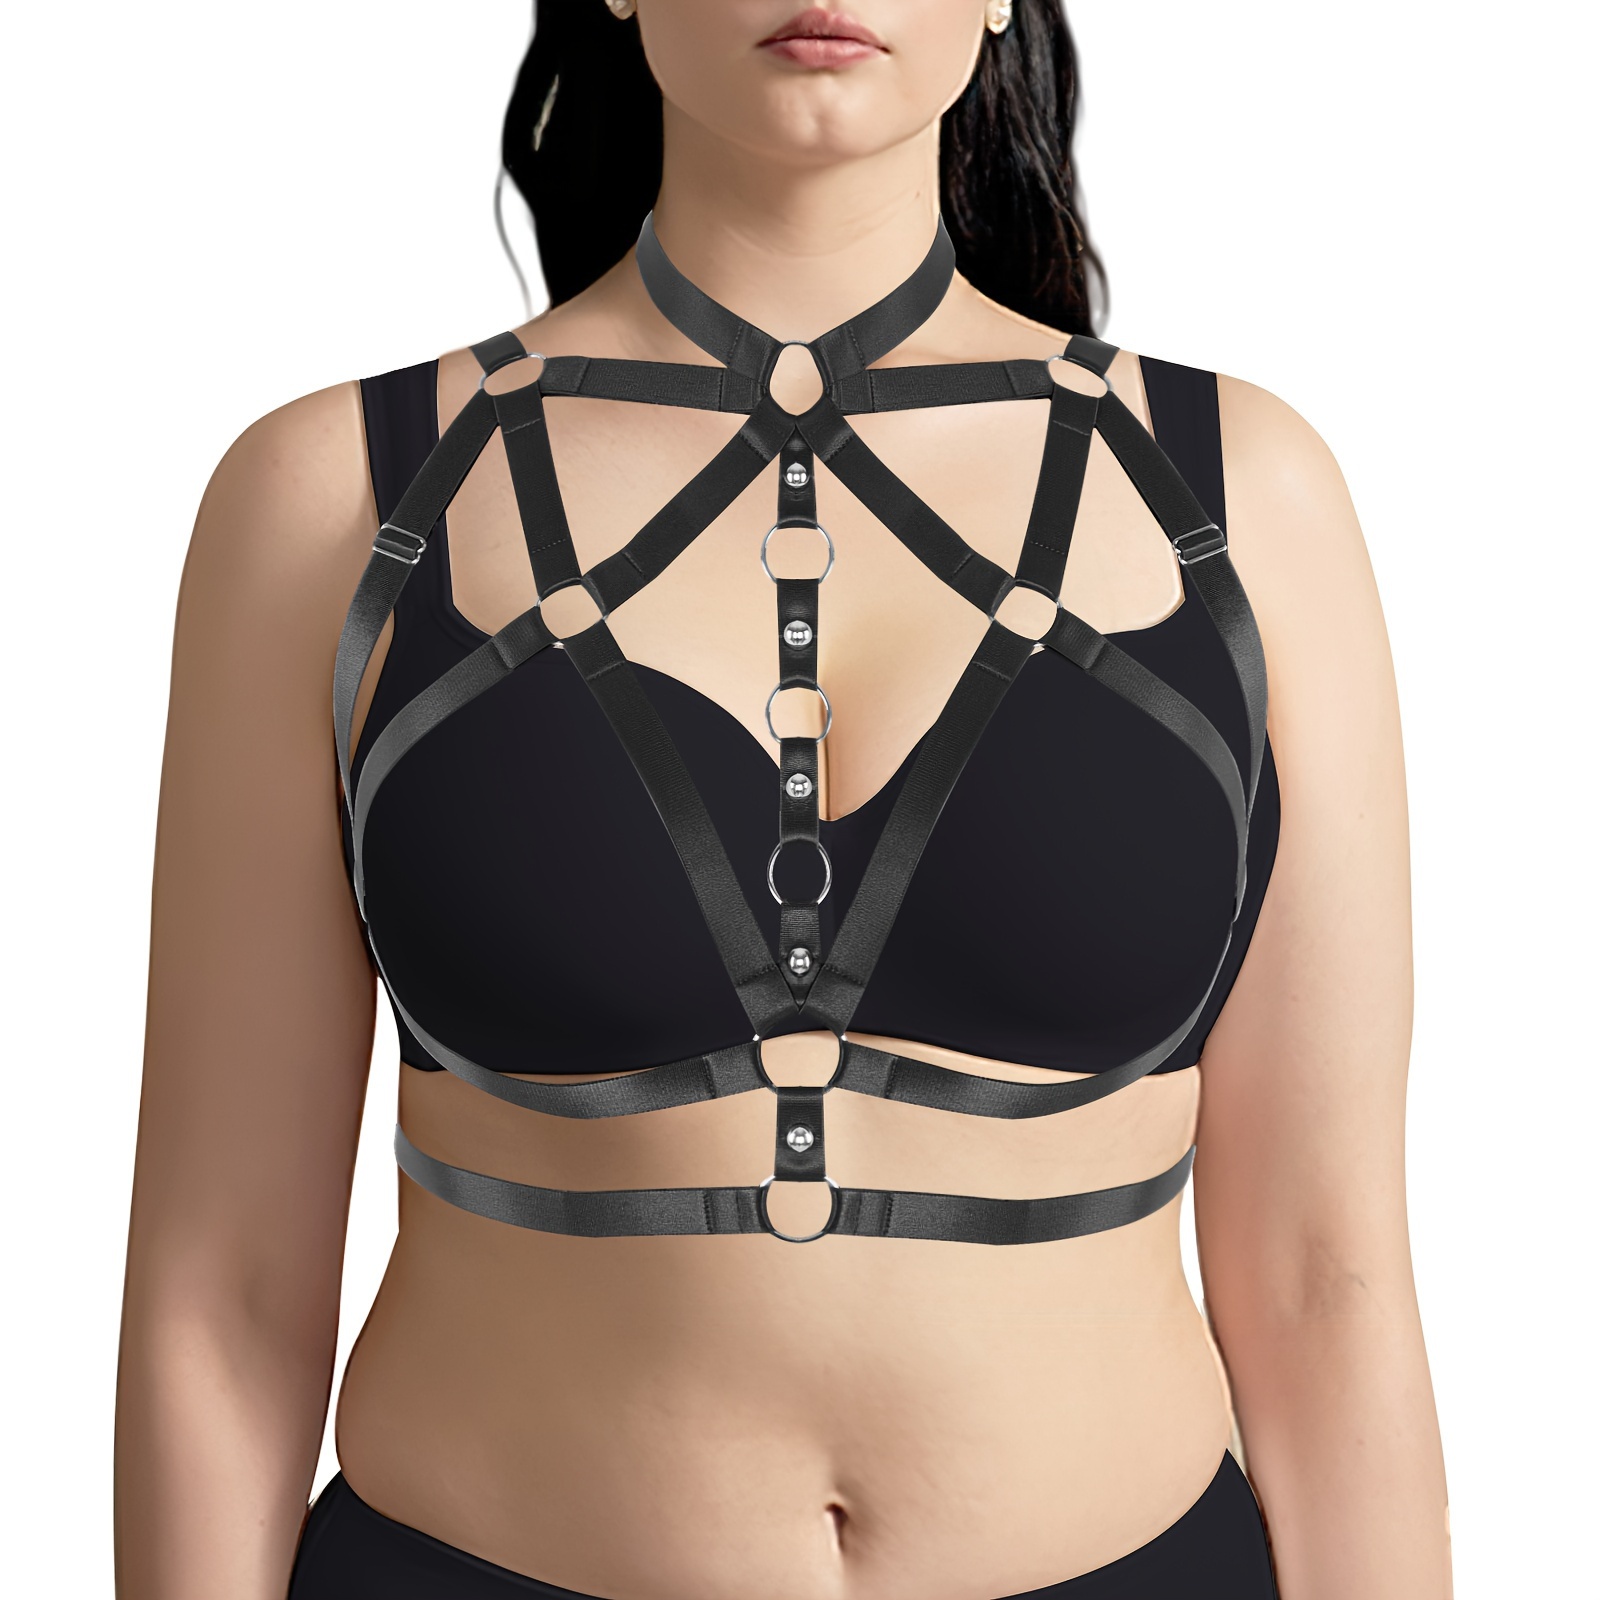 Women Harness Elastic Cupless Cage Bra Sexy Lingerie for Women Adjustable  Hollow Out Punk Gothic Style Strappy Bralette